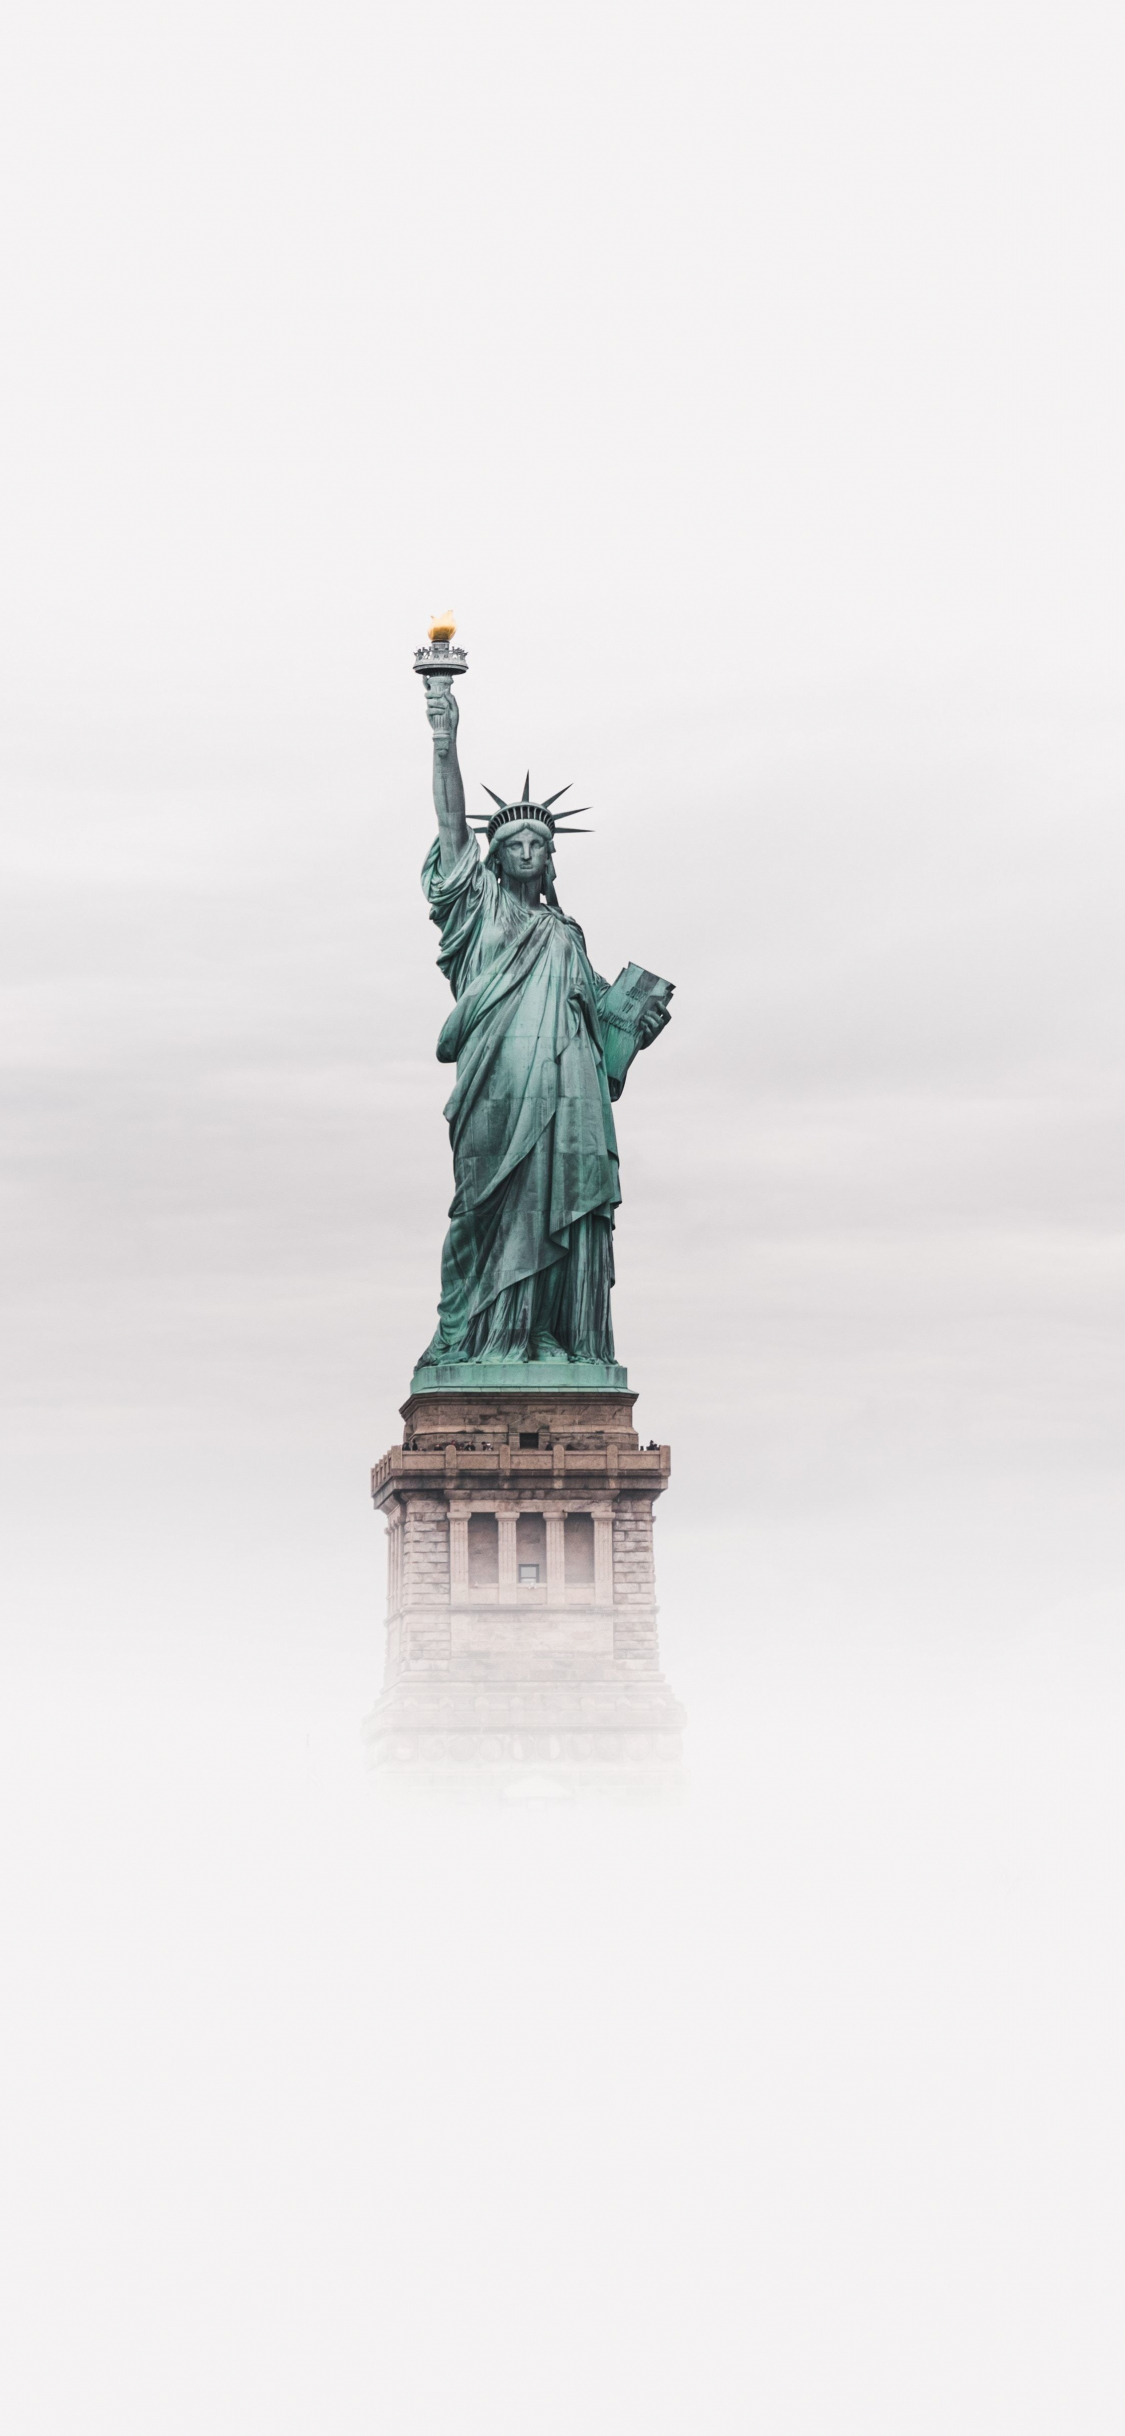 Download 1125x2436 wallpaper statue of liberty, architecture, minimal, iphone x 1125x2436 HD image, background, 9996